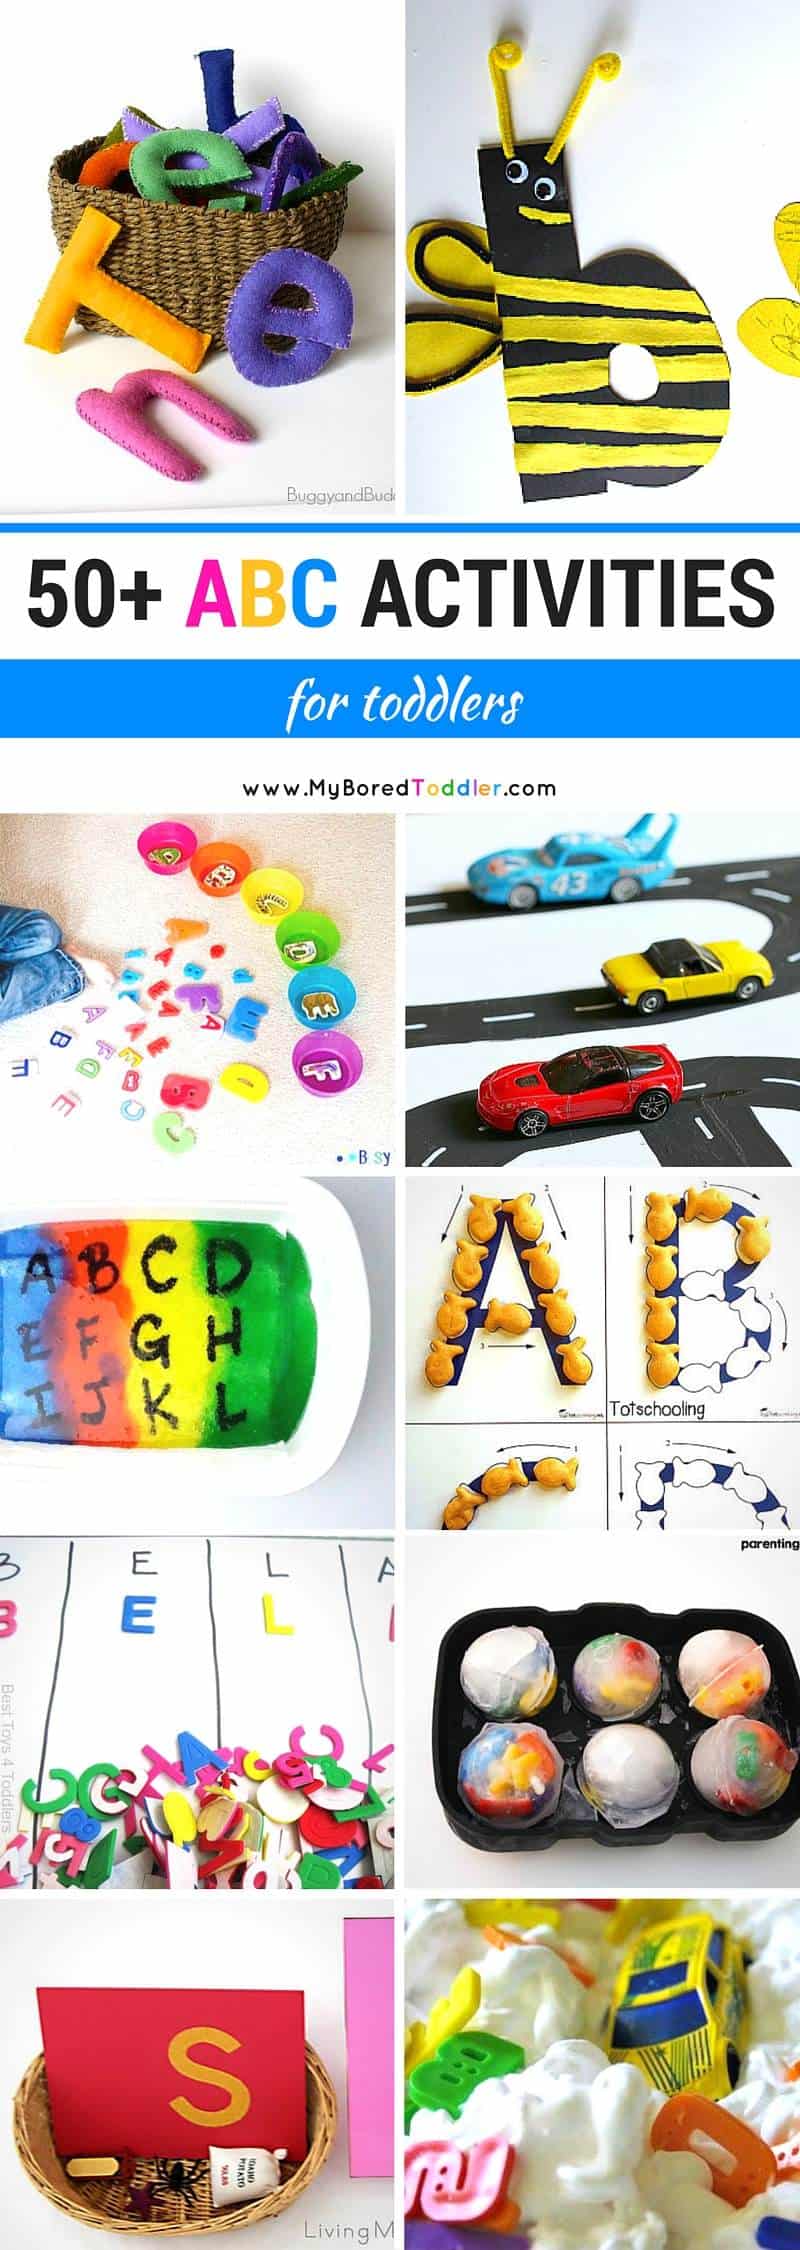 50+ ABC Activities for Toddlers